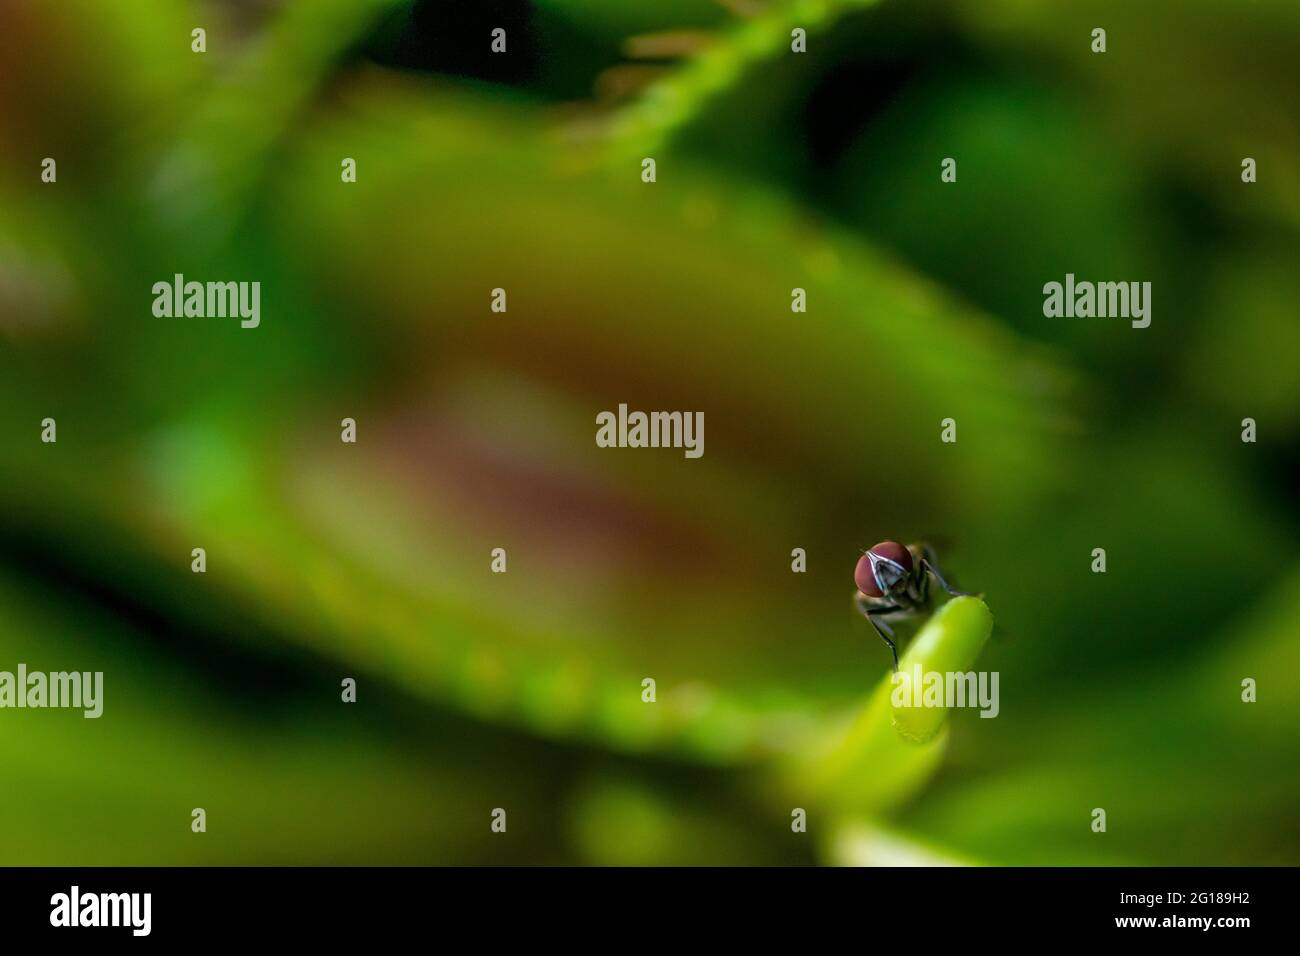 a macro image of a common house fly taking a rest on a Venus flytrap plant Stock Photo